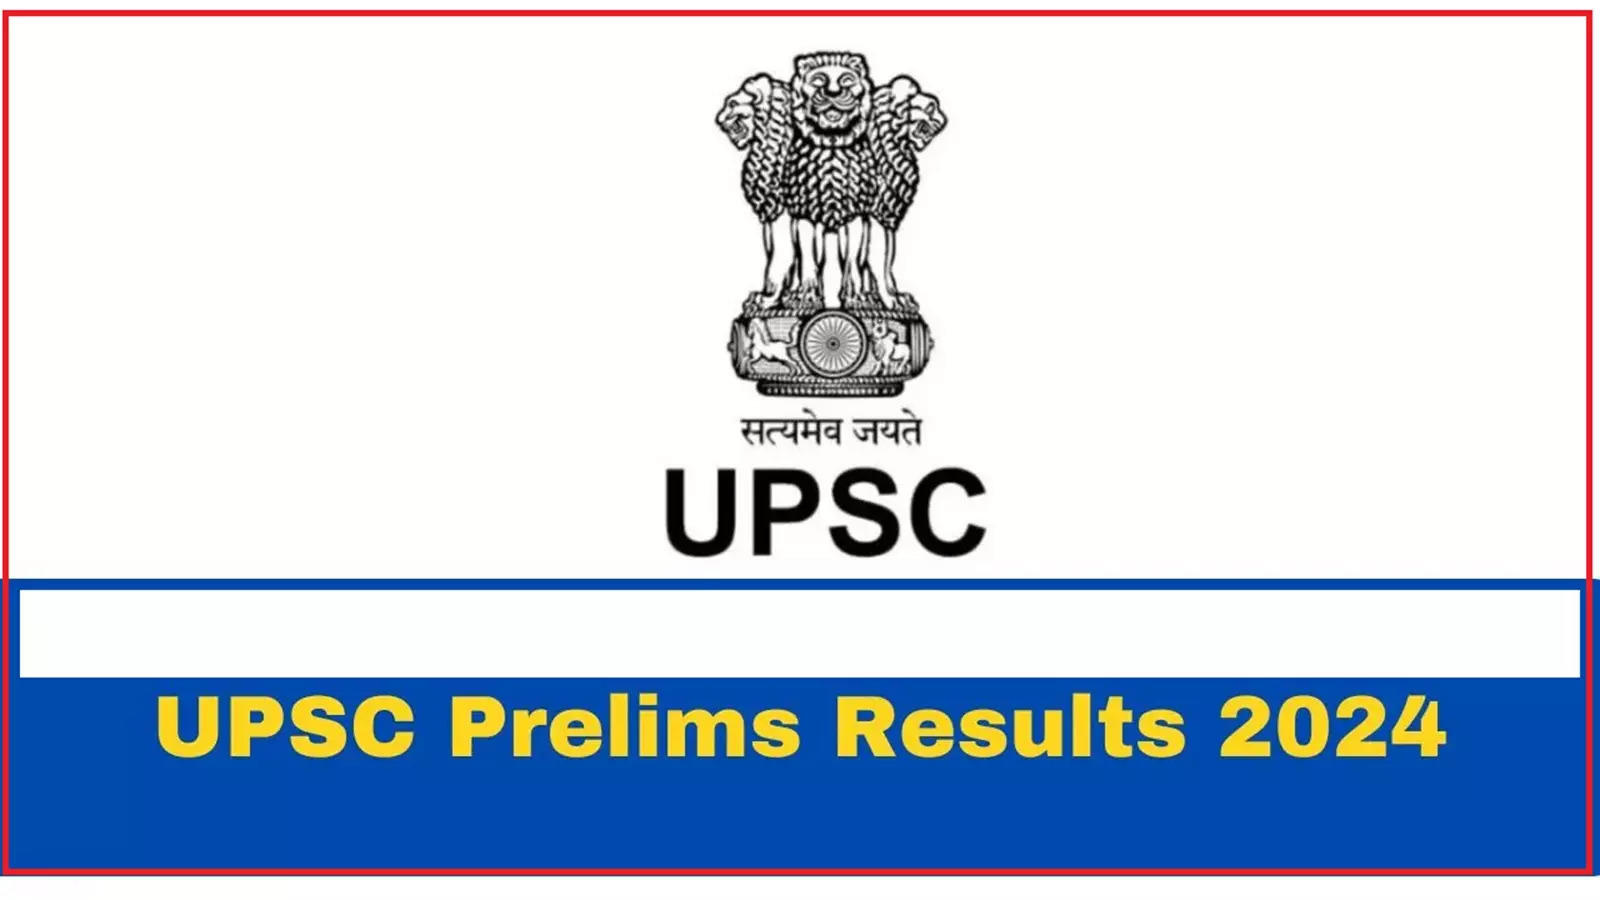 UPSC Pre Result 2024: How to check Civil Services Exam result on UPSC website upsc.gov.in